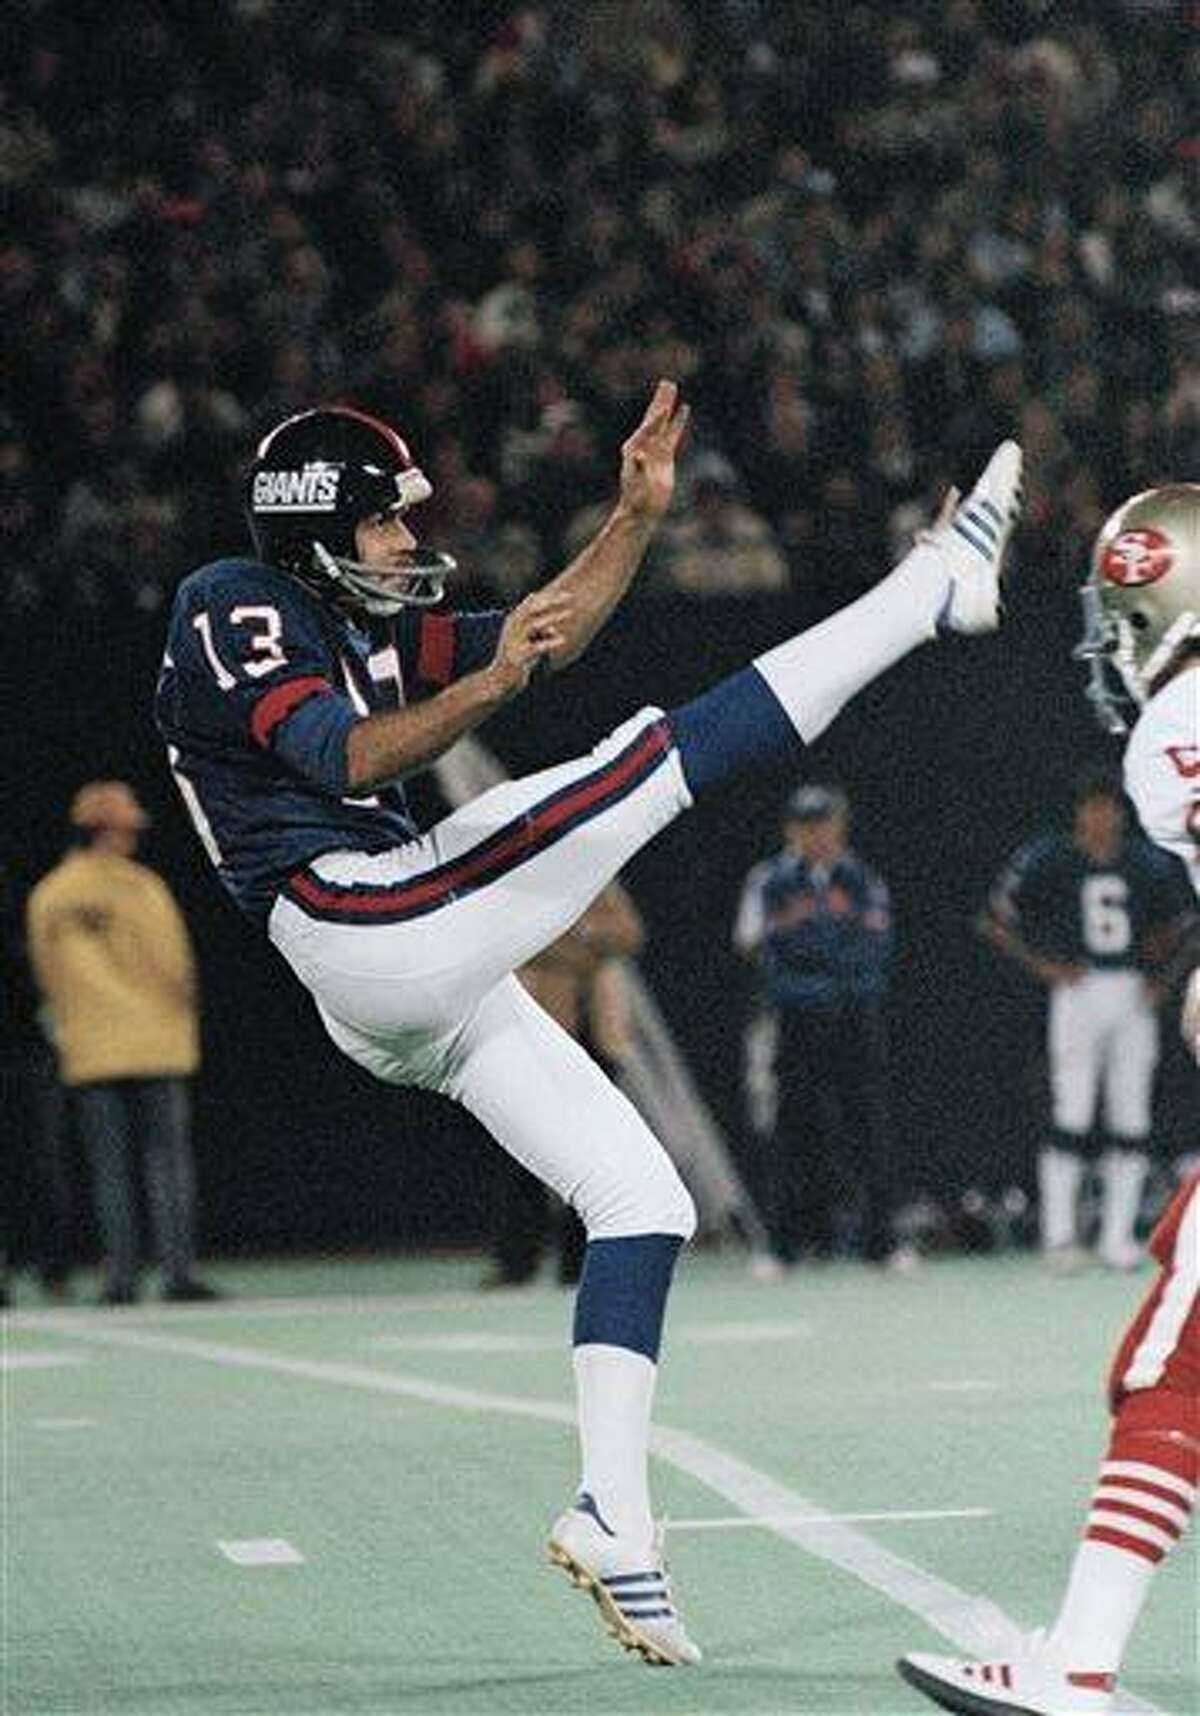 FILE - In this 1984 photo, New York Giants' Dave Jennings punts against the San Francisco 49ers during an NFL football game. Former New York Giants punter and radio analyst Dave Jennings has died. He was 61. The Giants announced that Jennings died at his home in Upper Saddle River, N.J., on Wednesday morning, June 19, 2013. (AP Photo/File)